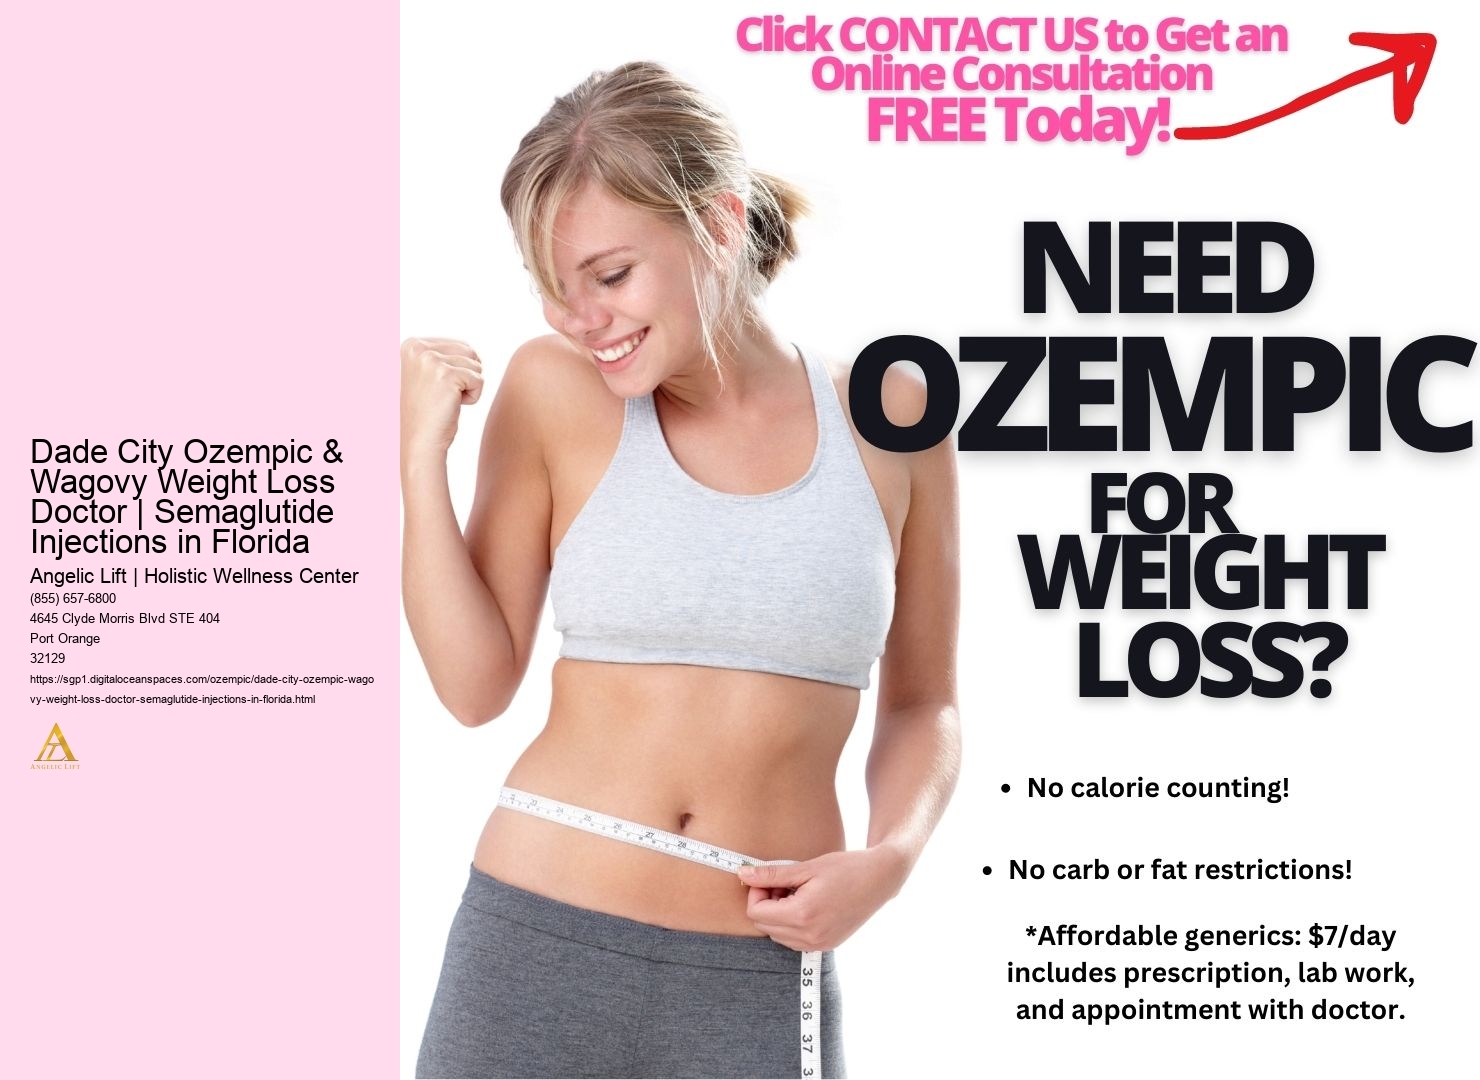 Dade City Ozempic & Wagovy Weight Loss Doctor | Semaglutide Injections in Florida